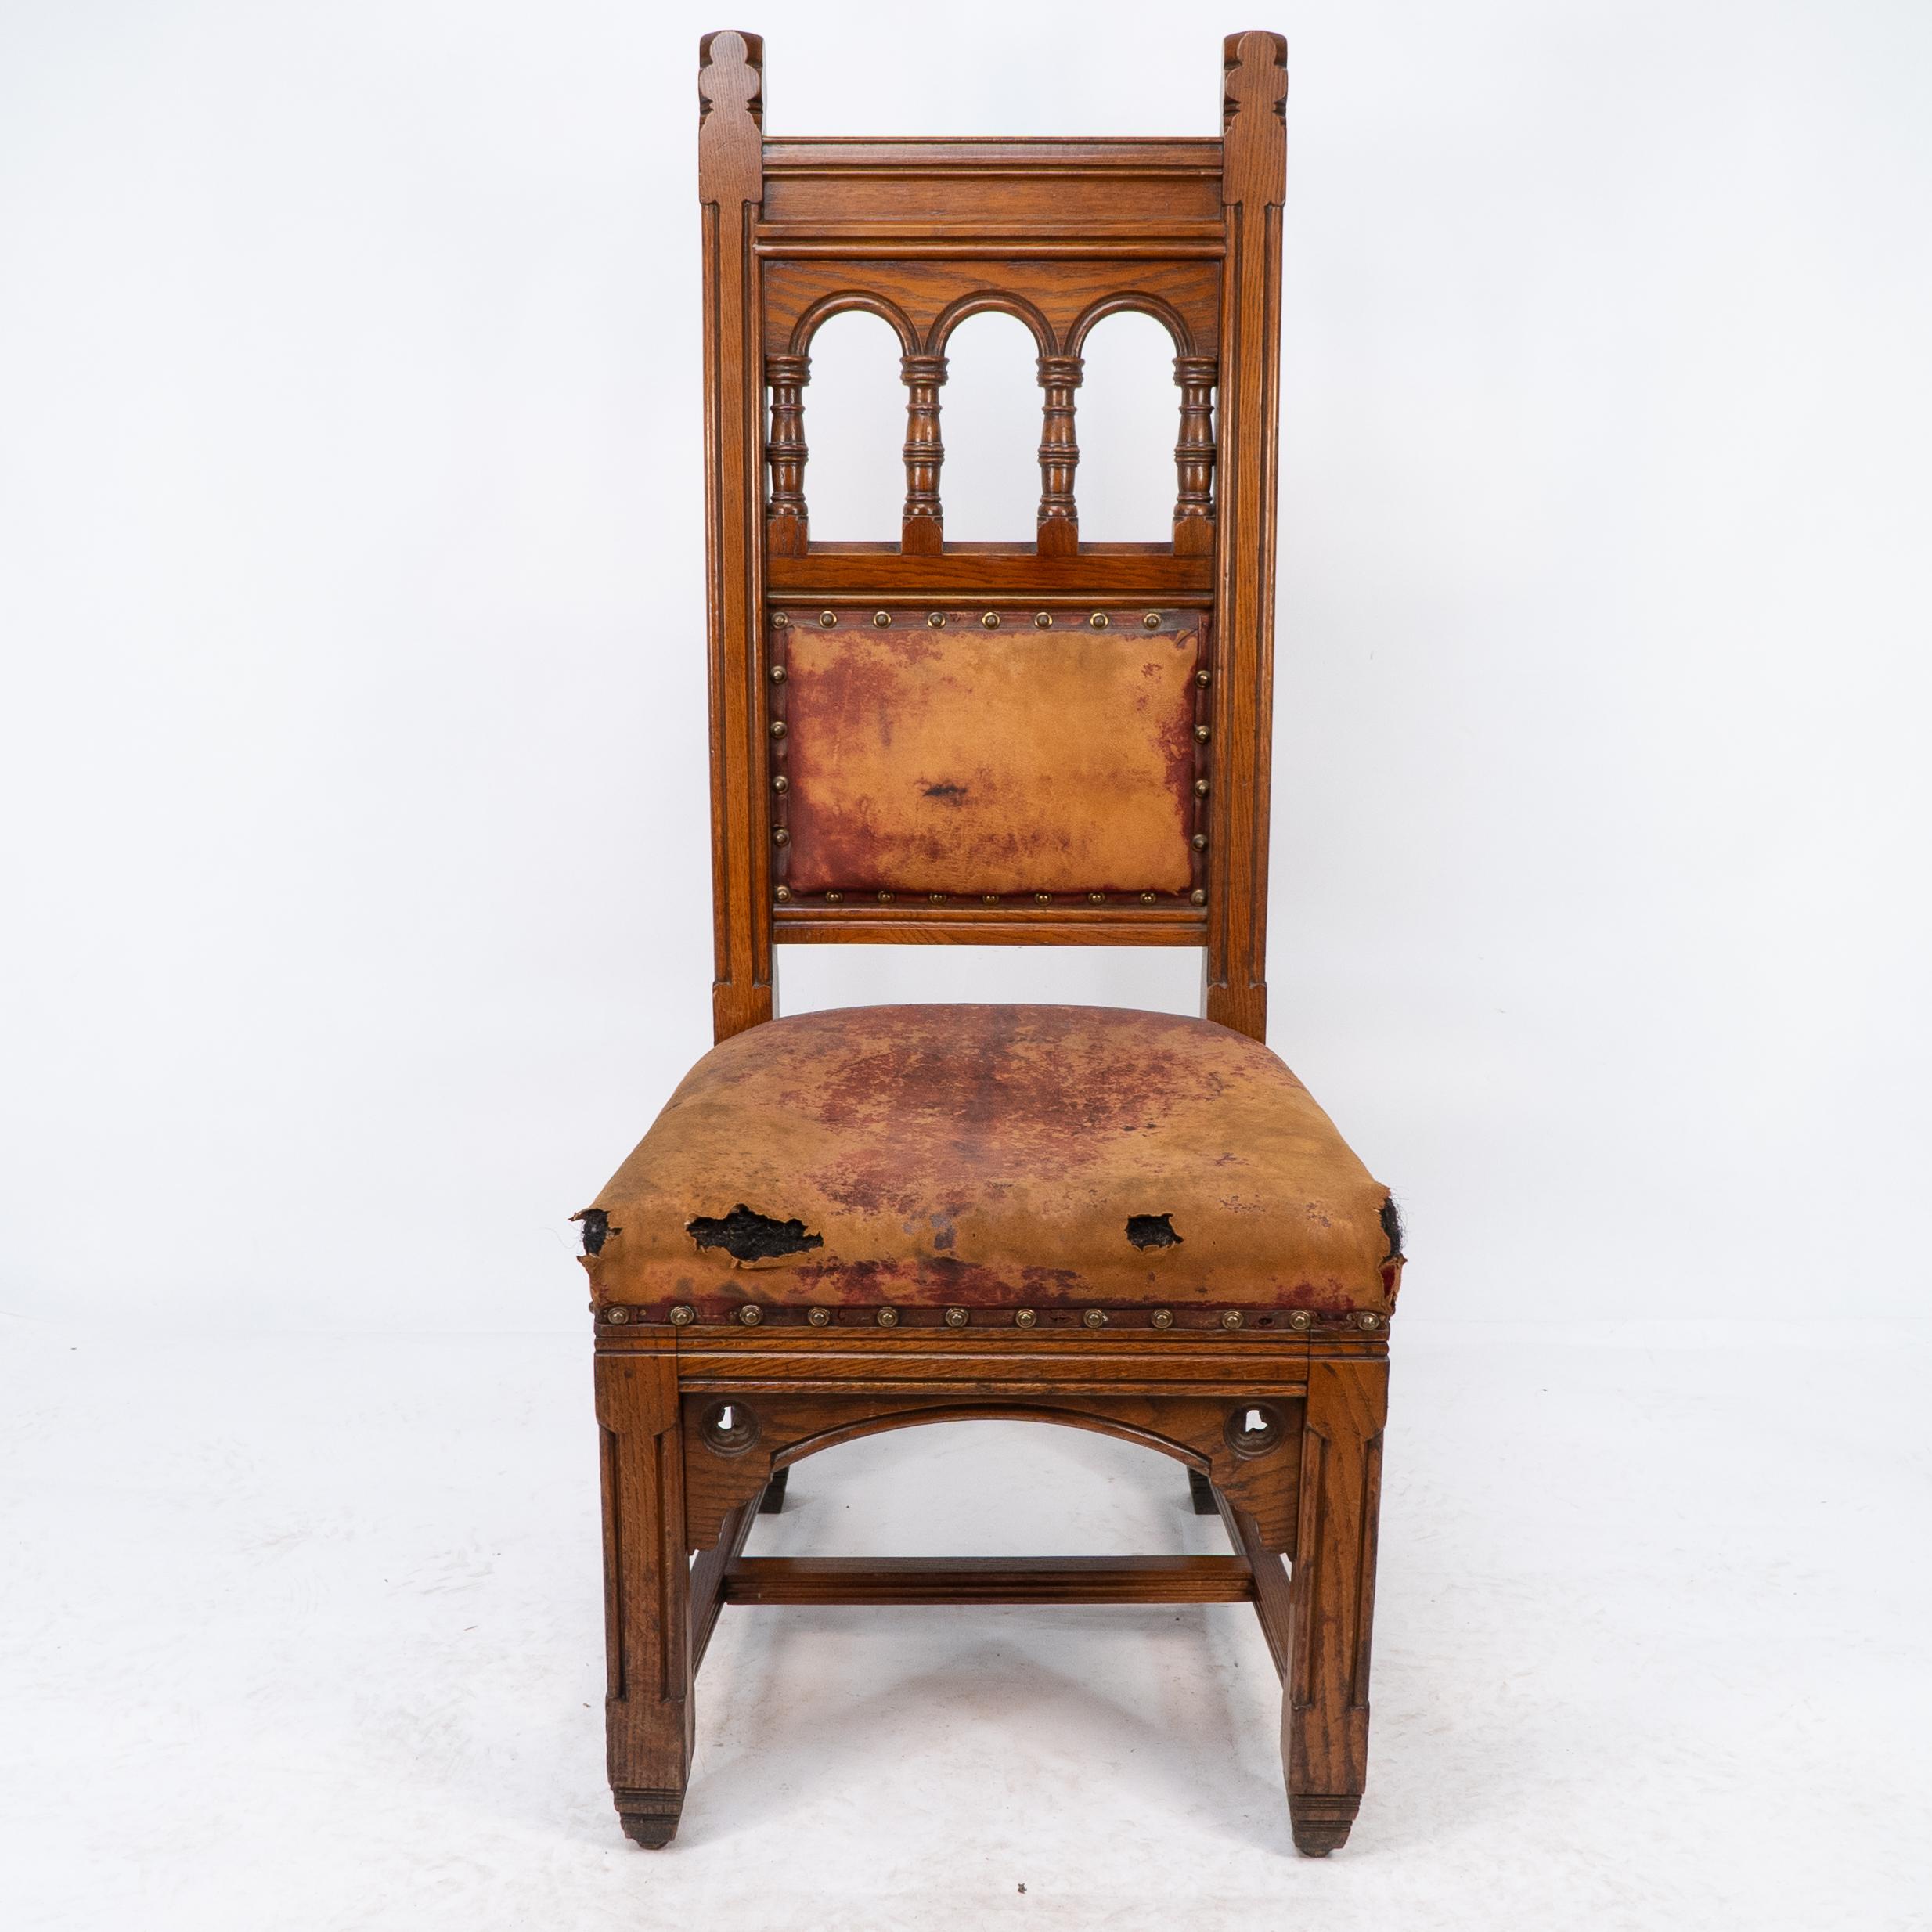 Bruce Talbert. Gillows. A rare and important Gothic Revival tall back oak chair with the original distressed leather seat and back rest.
The last image is published in Bruce Talbert’s book ‘Gothic Forms Applied to Furniture, Metalwork and